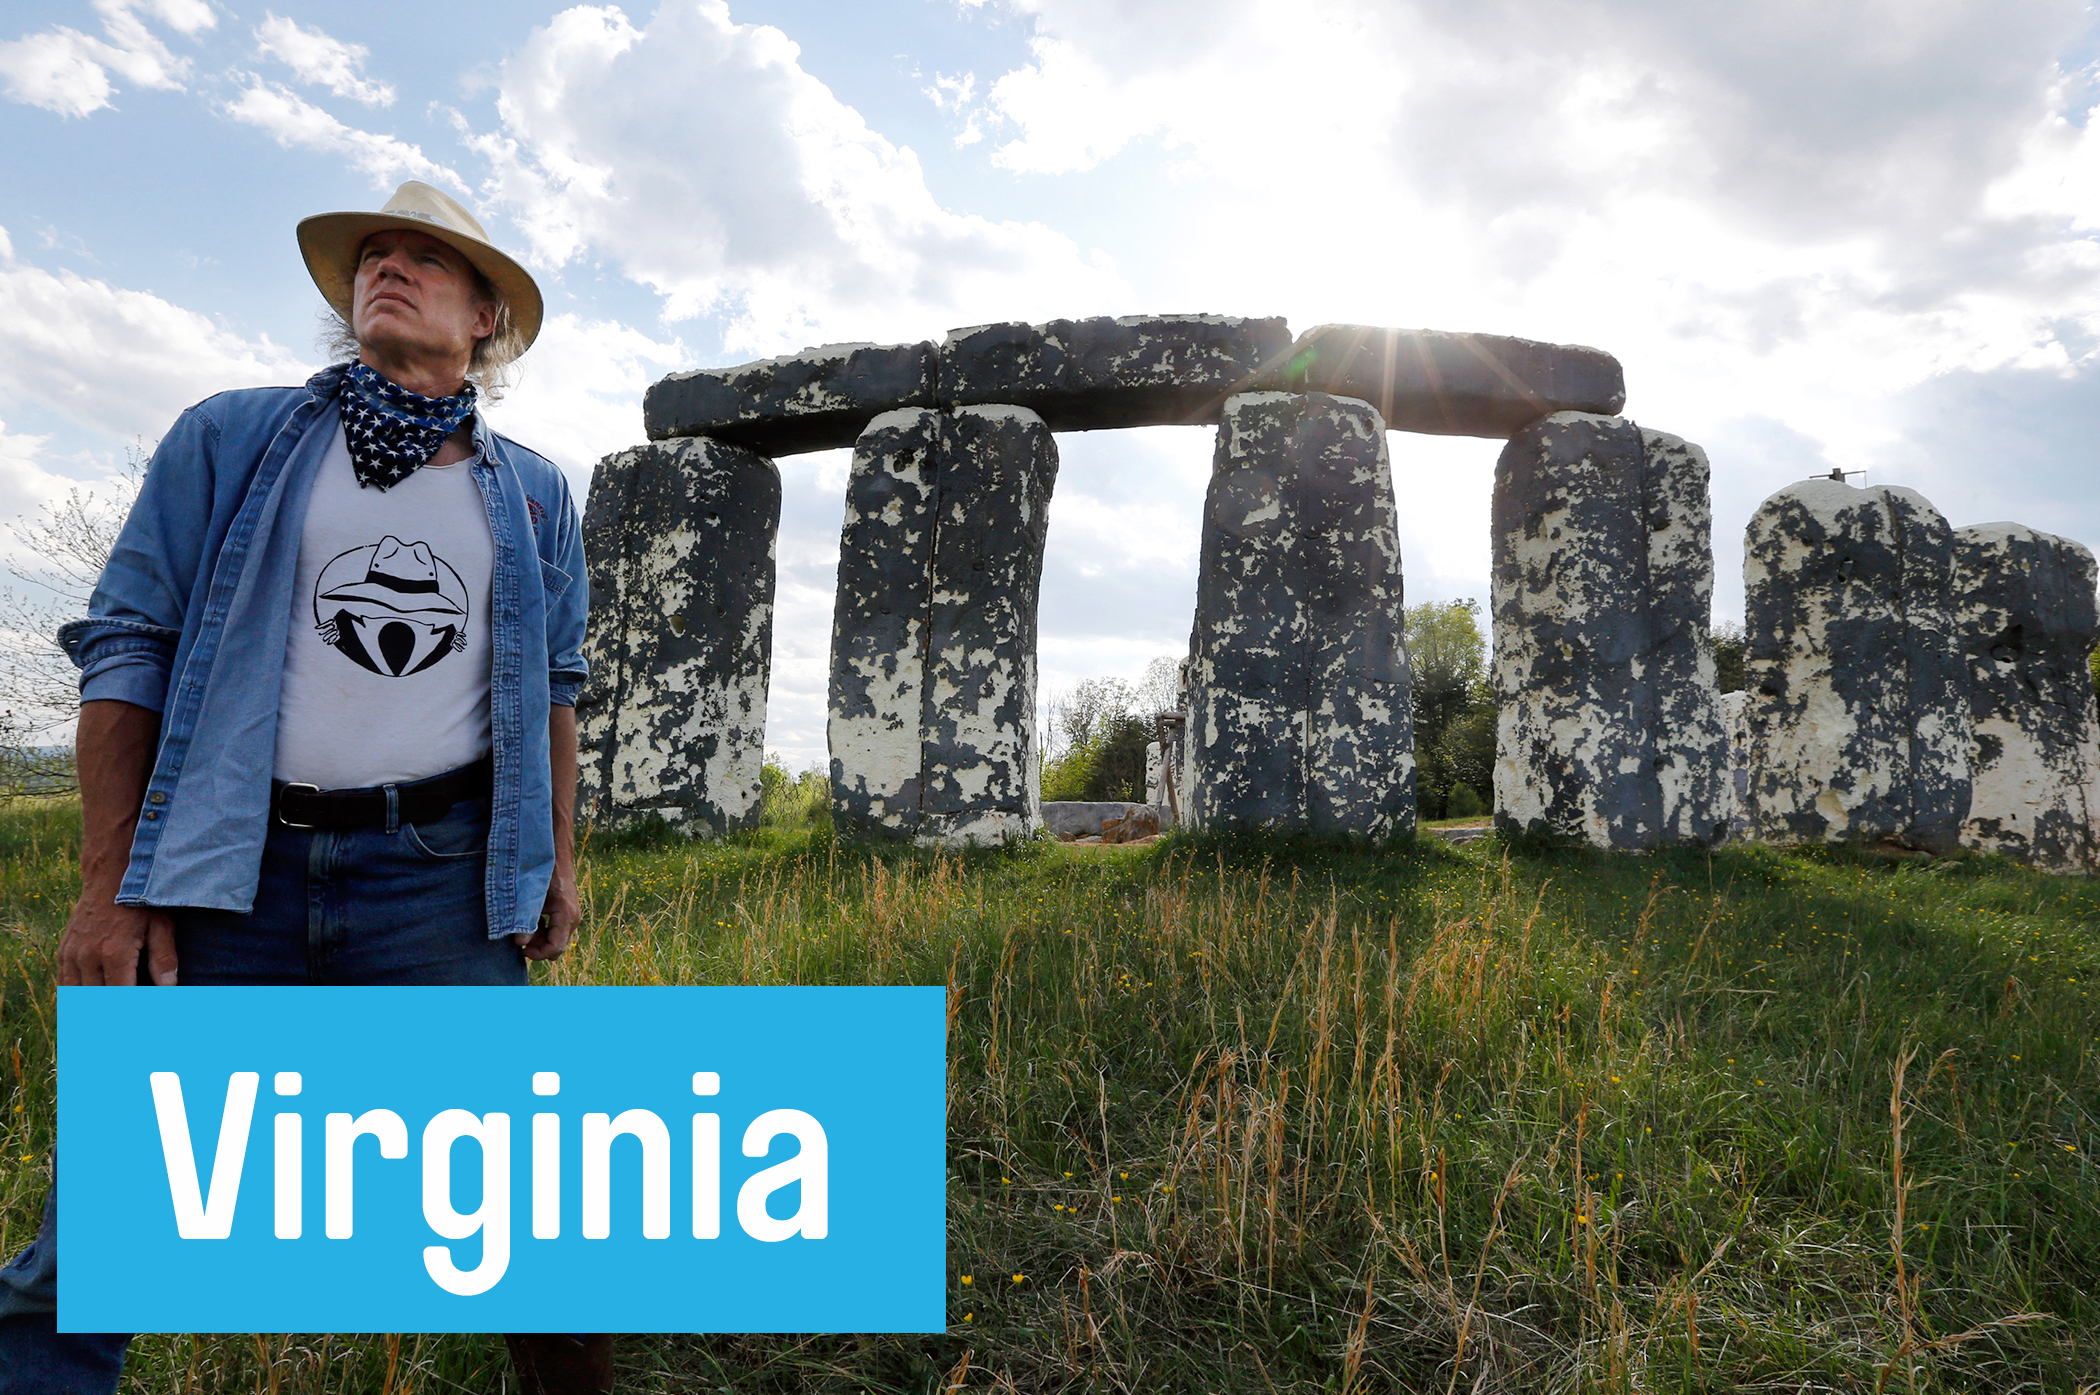 Pose for photos at <a href="http://www.thefoamhenge.com/" target="_blank">Foamhenge,</a> the somewhat less sturdy replica of Stonehenge, in Natural Bridge. Foamhenge is made entirely of styrofoam.